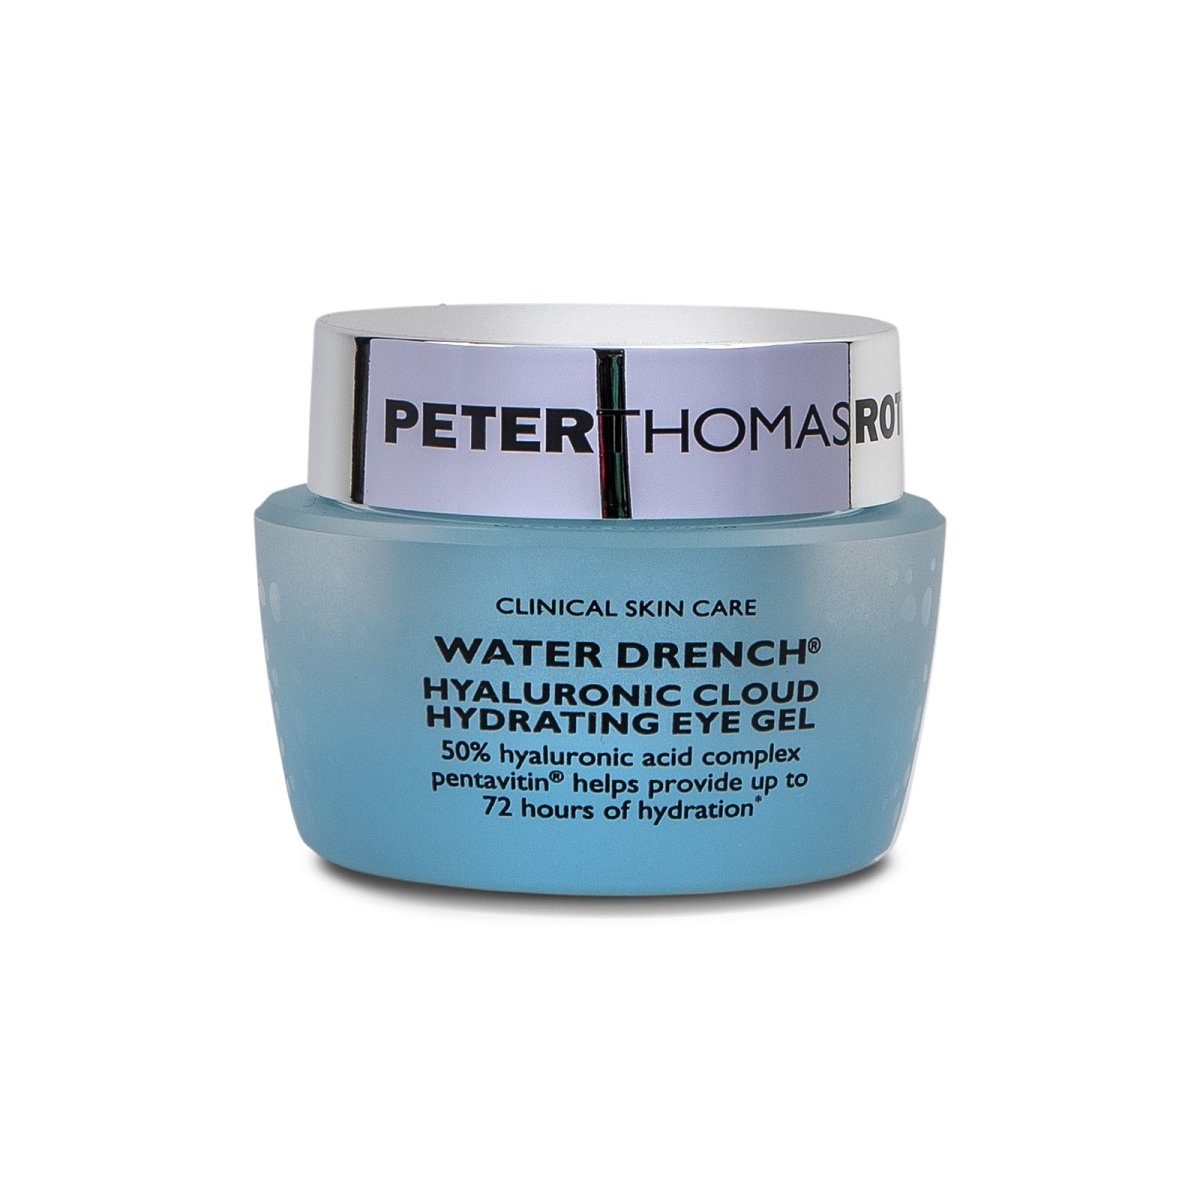 Peter Thomas Roth Water Drench® Hyaluronic Cloud Hydrating Eye Gel - SkincareEssentials